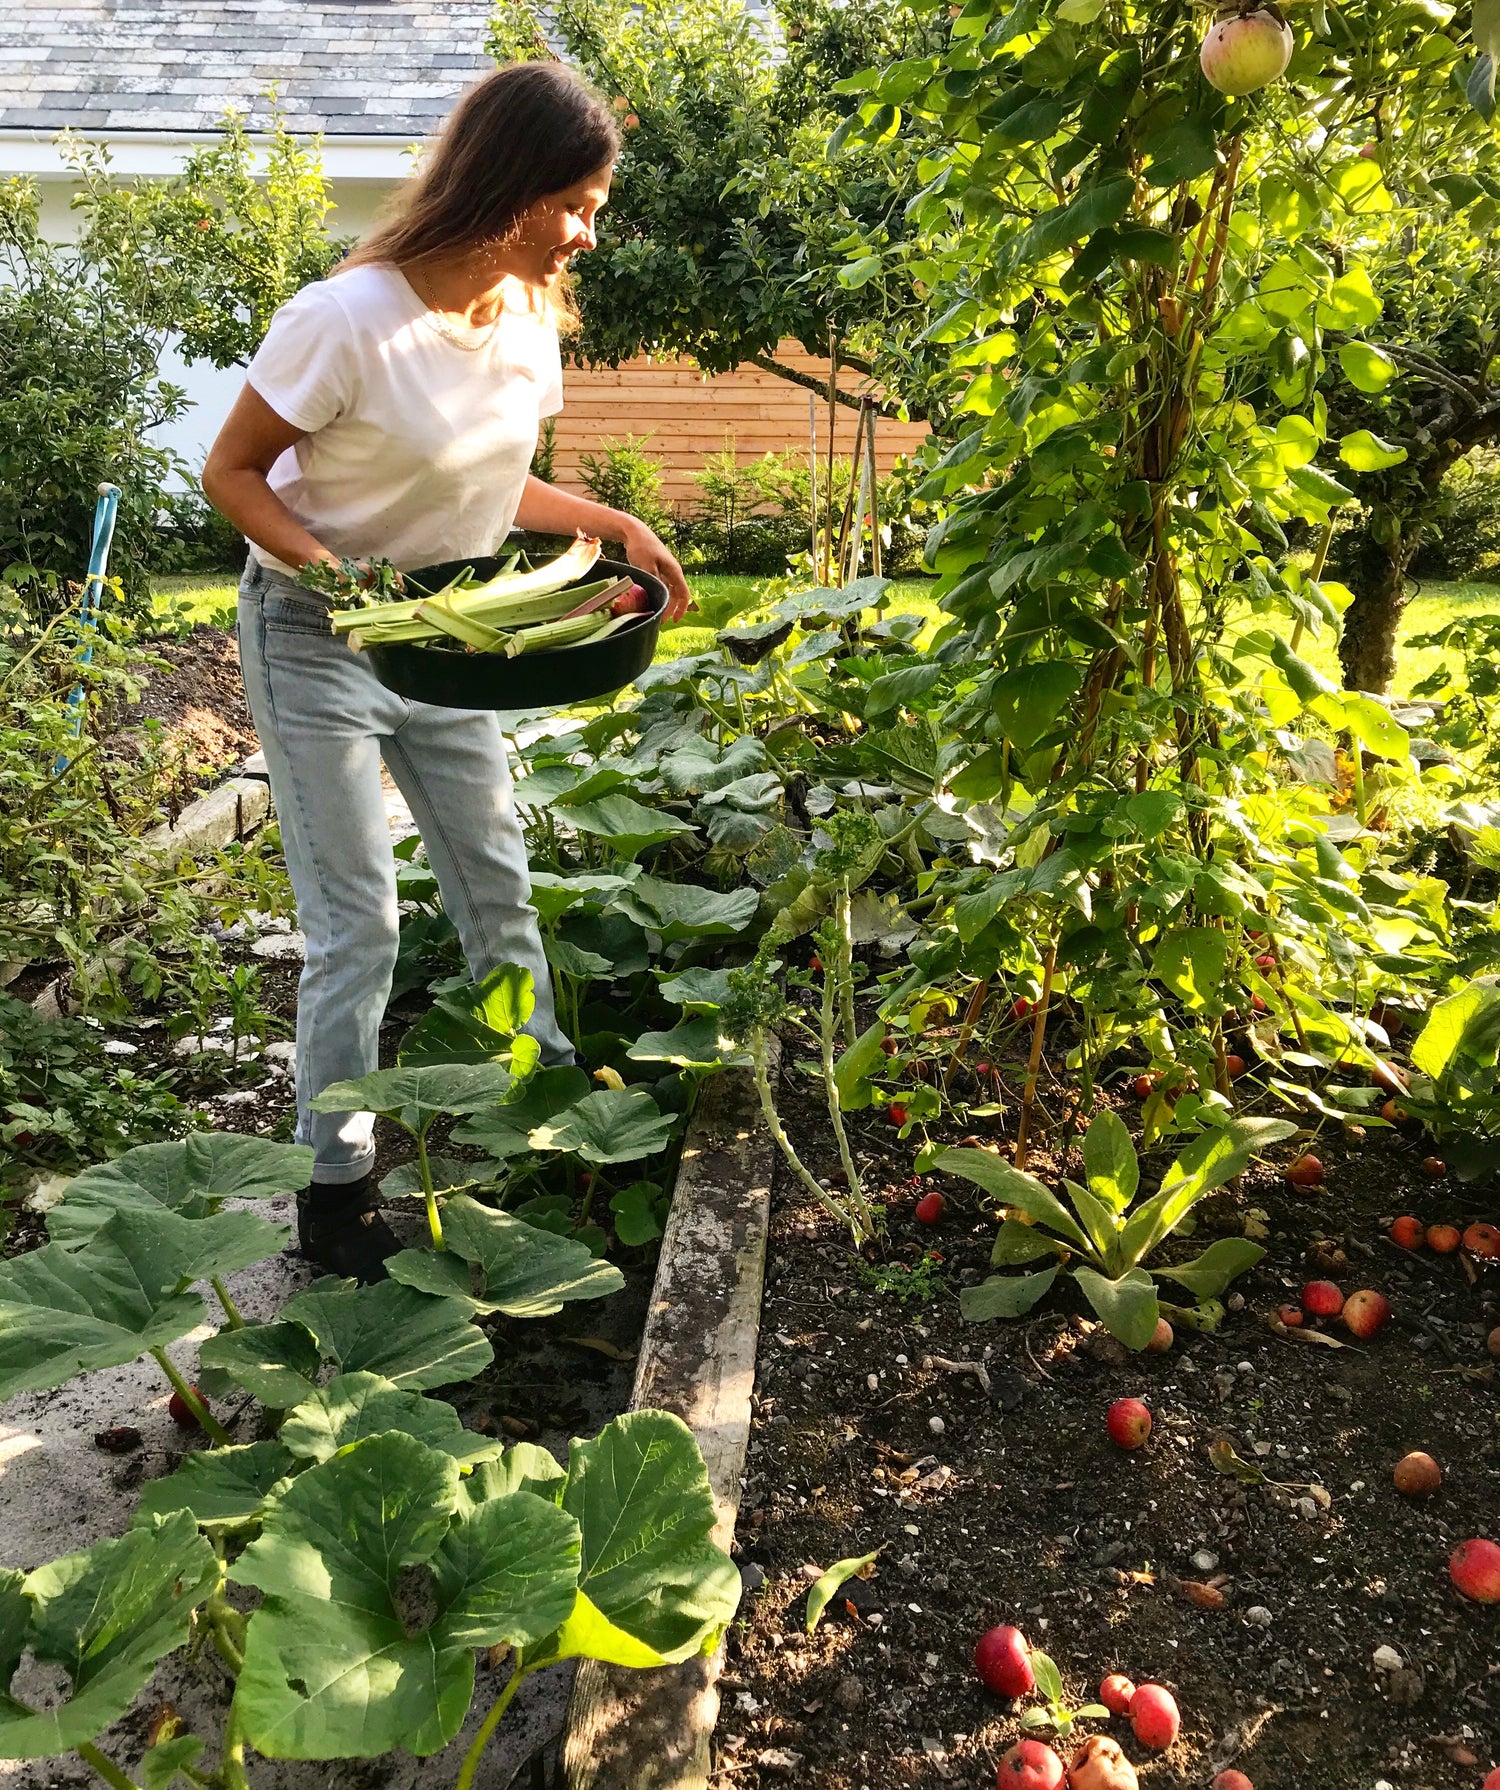 ChicP Founder, Hannah McCollum, in her organic vegetable garden. She has a basket filled with green vegetables as she goes to pick more vegetables from her plants